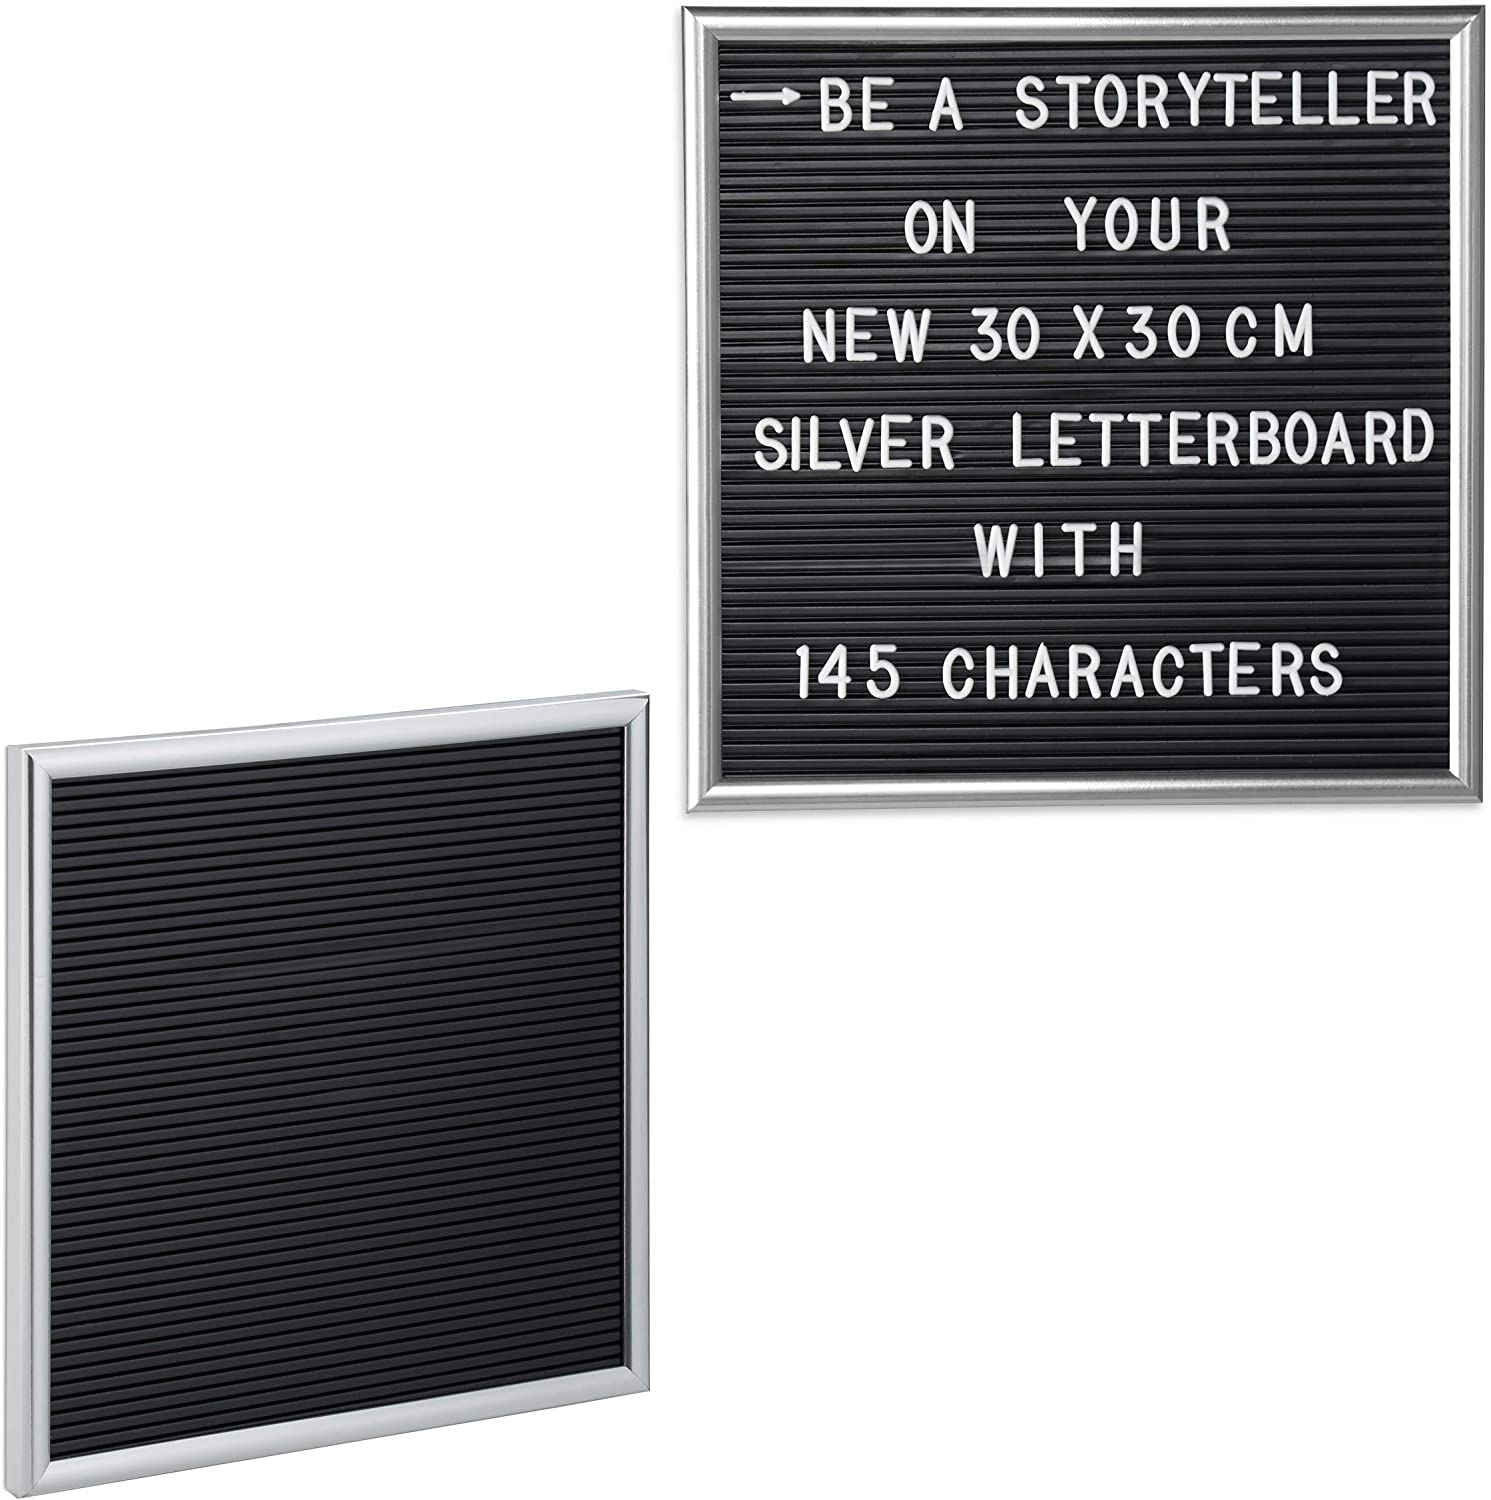 2 x Letterboard with Wooden Frame, 145 Letters, Numbers & Special Characters, Grooved Board for Pushing, 30 x 30 cm, Silver